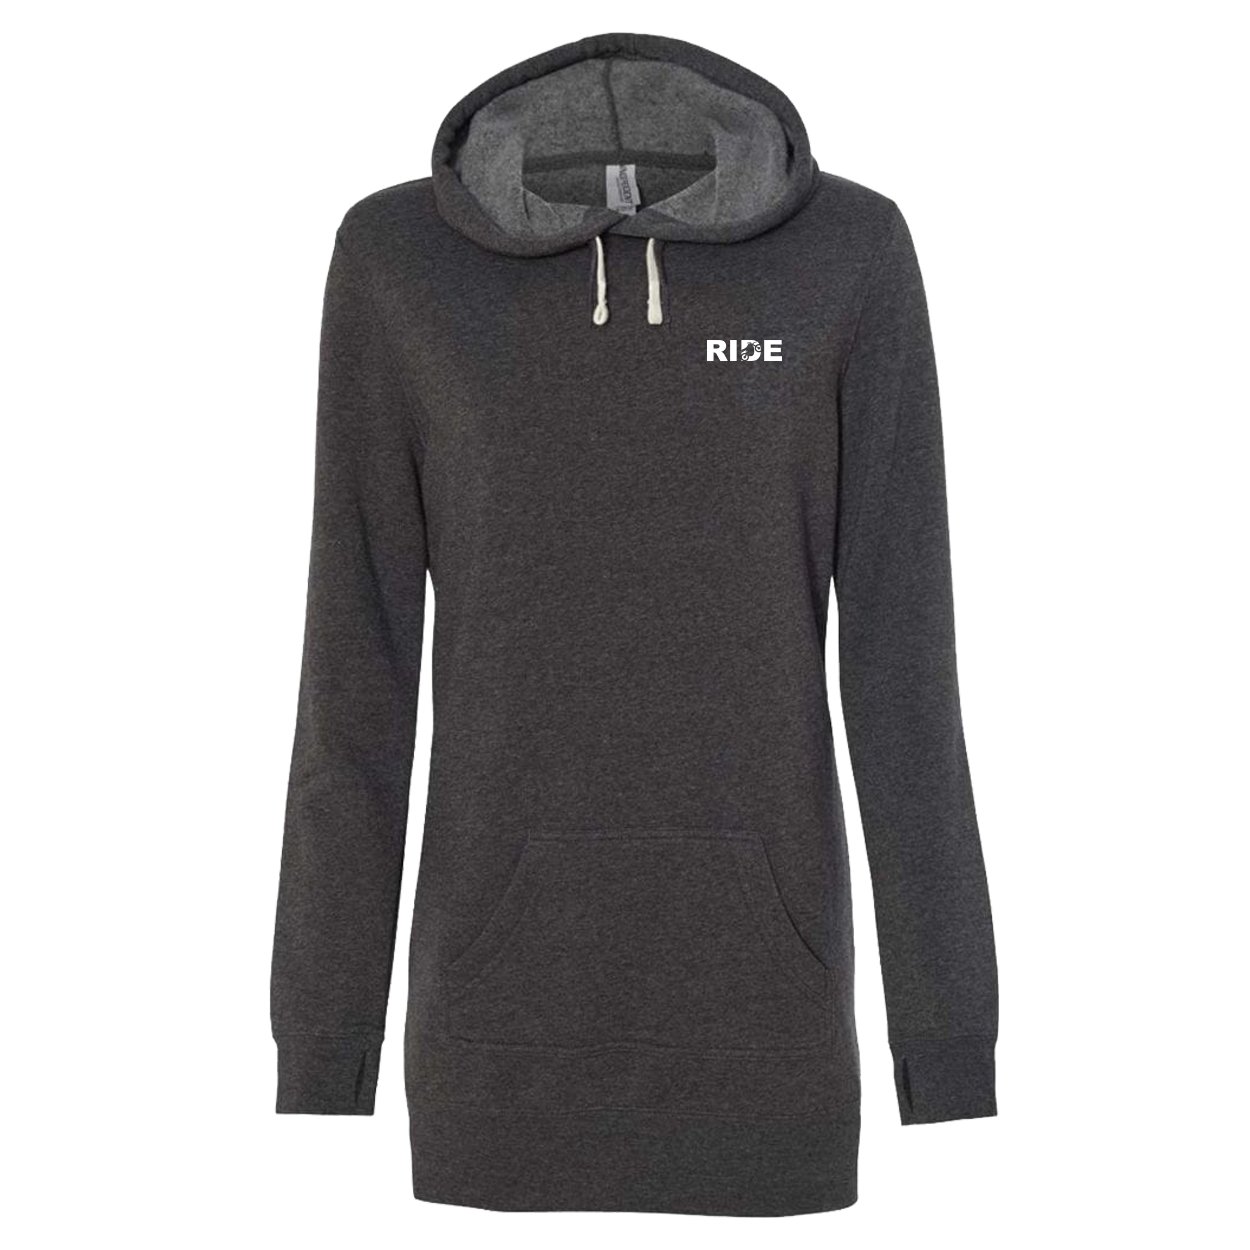 Ride Moto Logo Night Out Womens Pullover Hooded Sweatshirt Dress Carbon